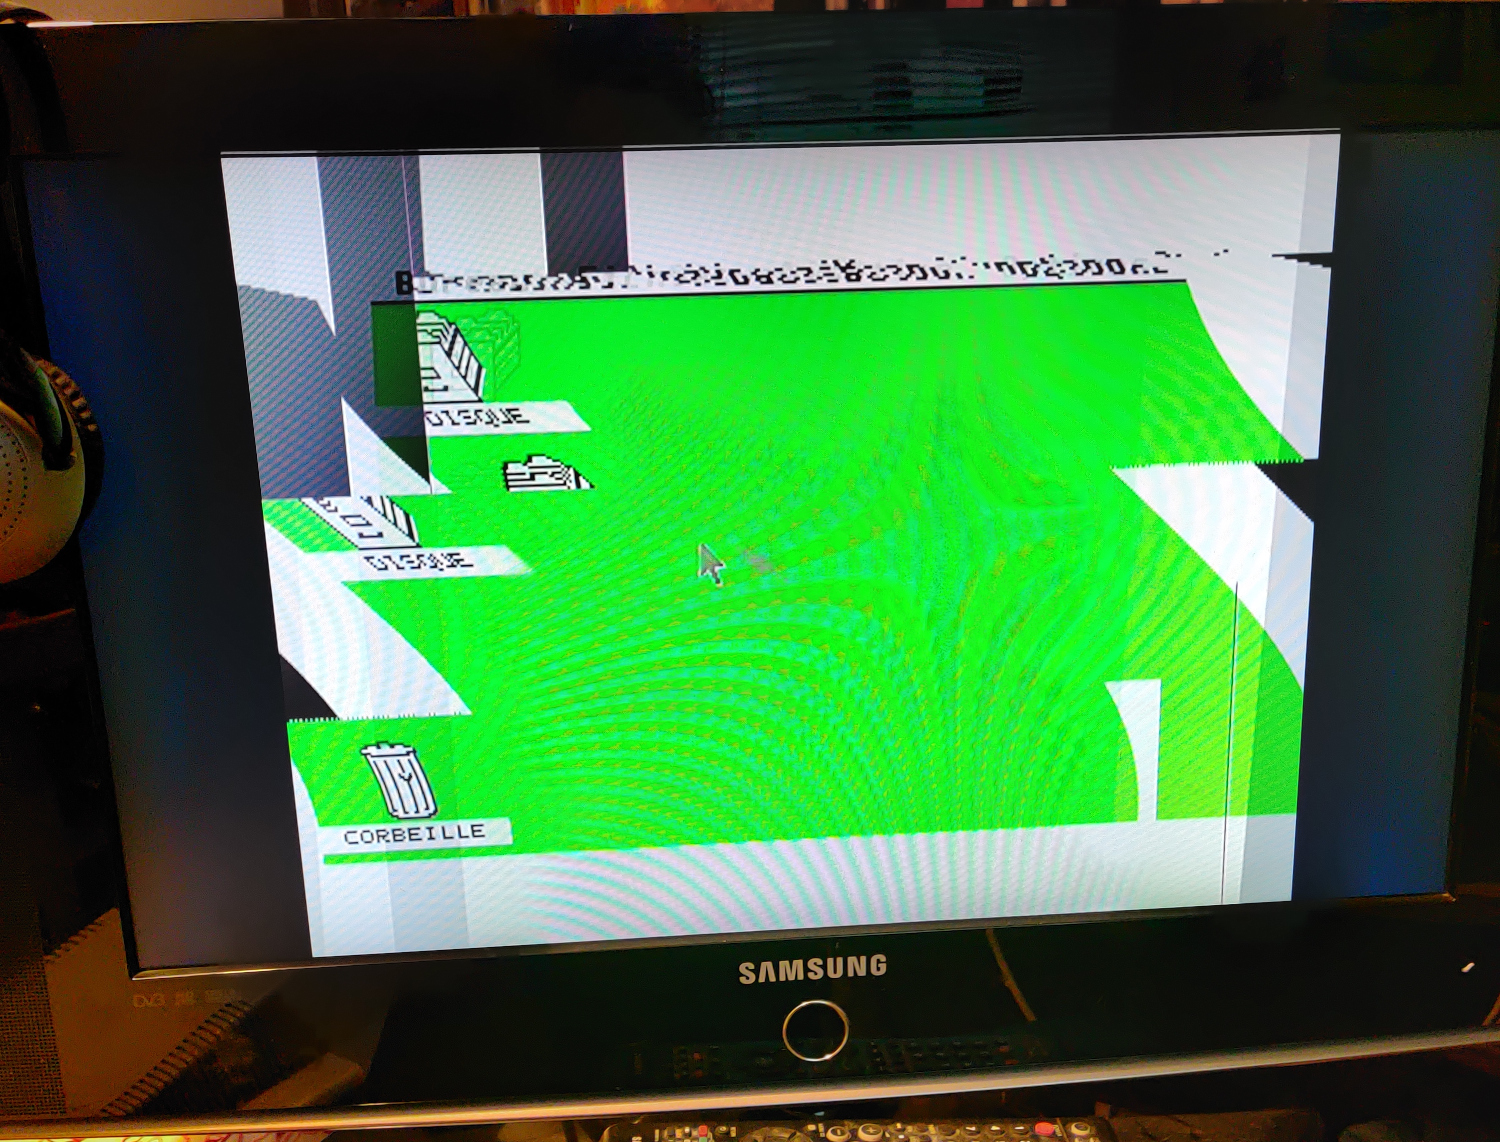 Atari ST picture on LCD screen with original C-Sync signal